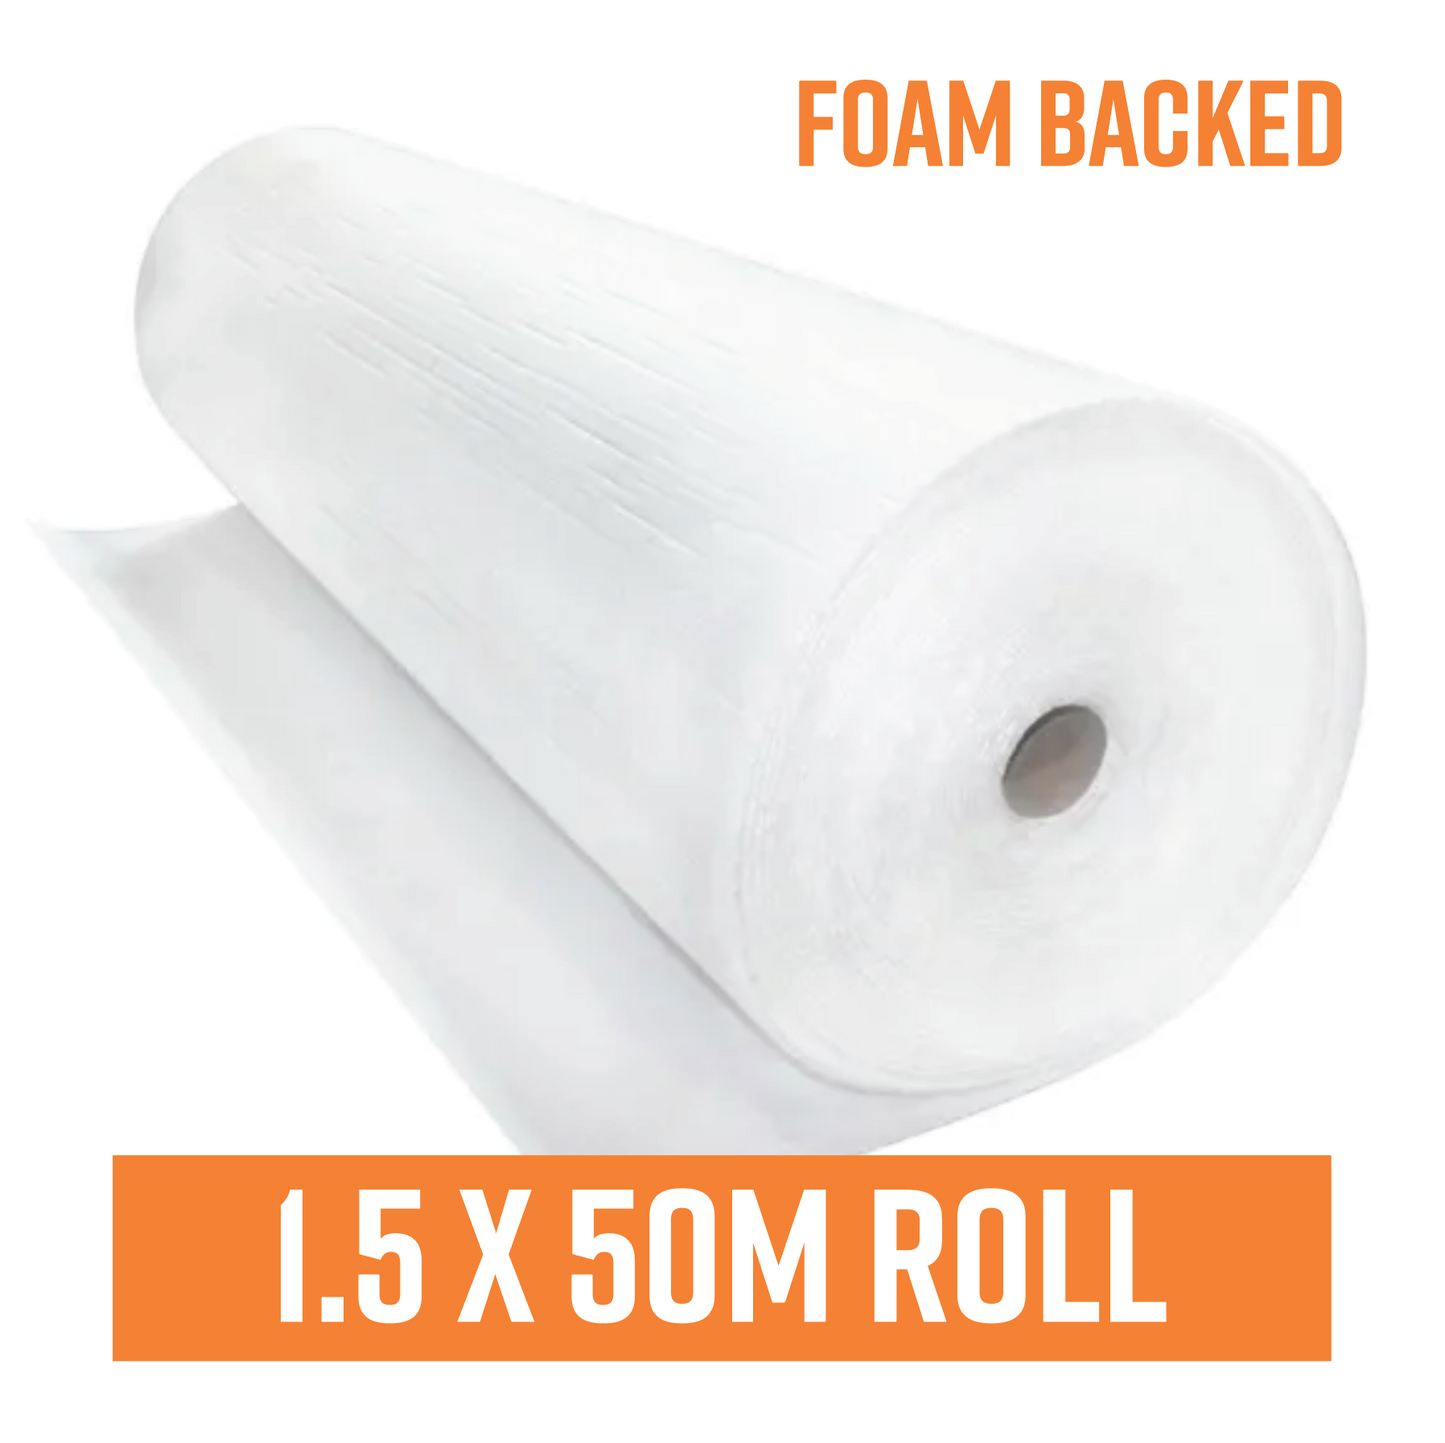 Foam Backed Polyweave Protection Cover Roll - 1.5m X 50m Roll - Three Layered